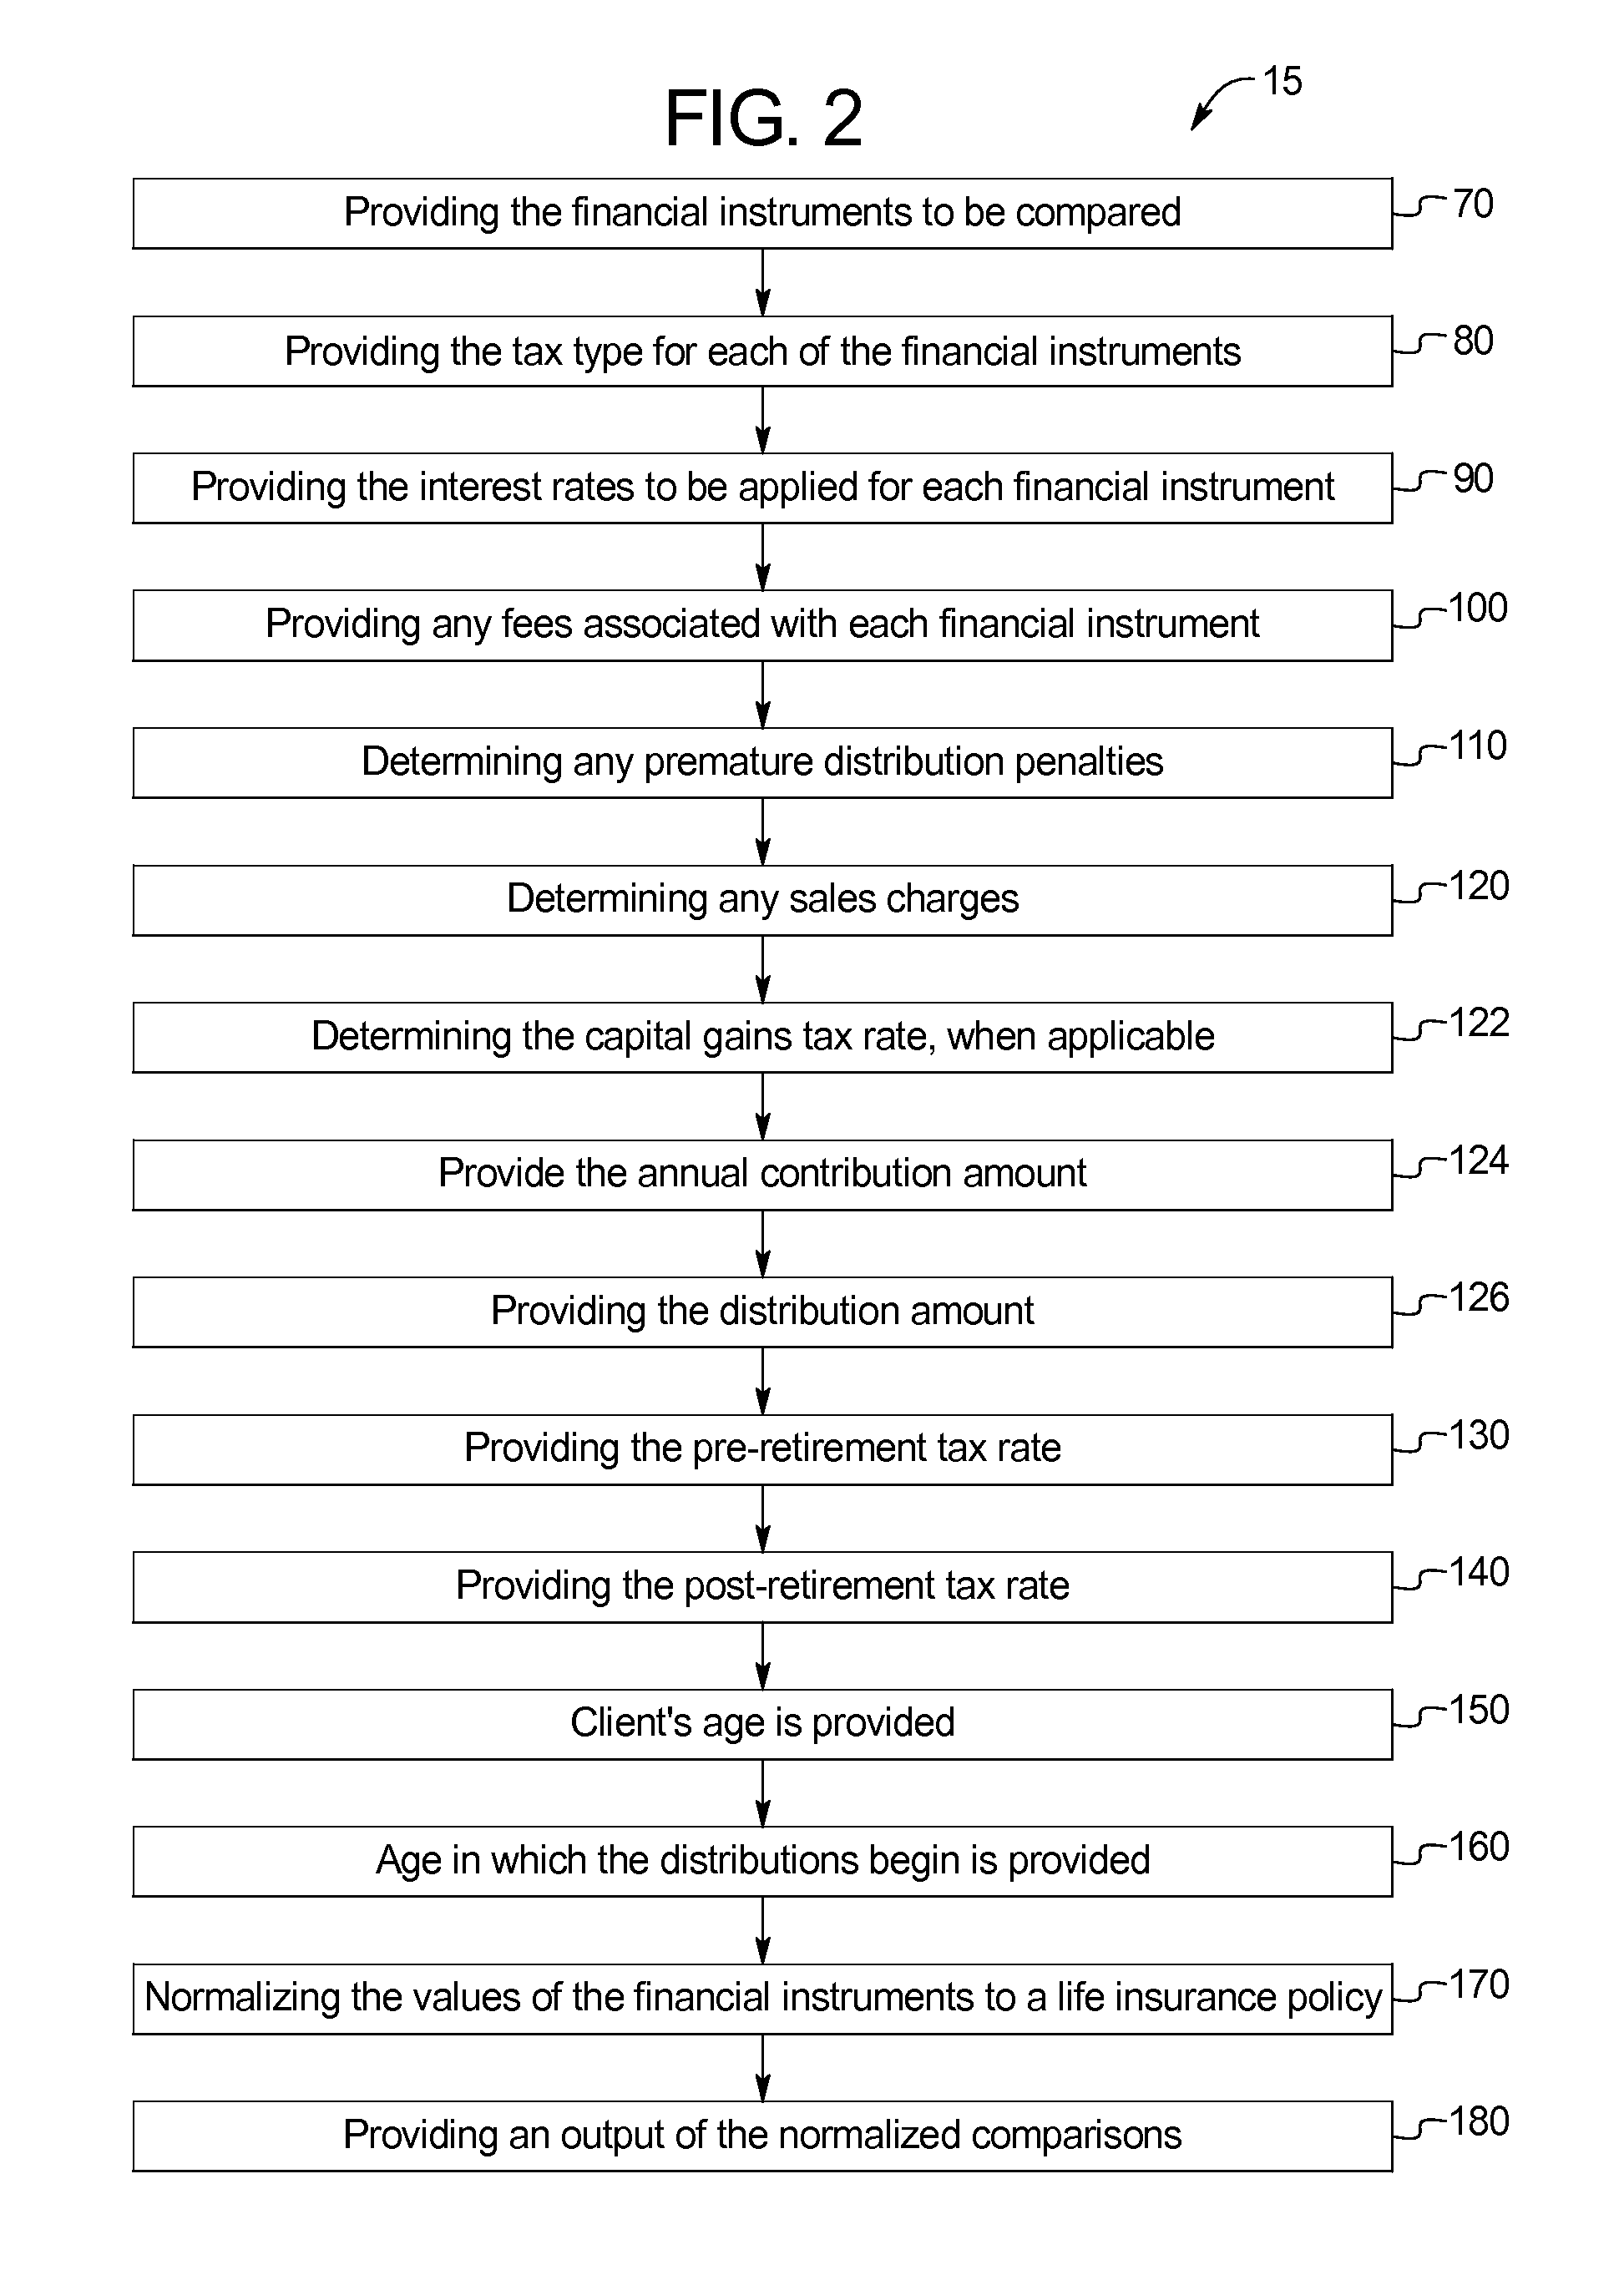 System and method for comparing financial instruments